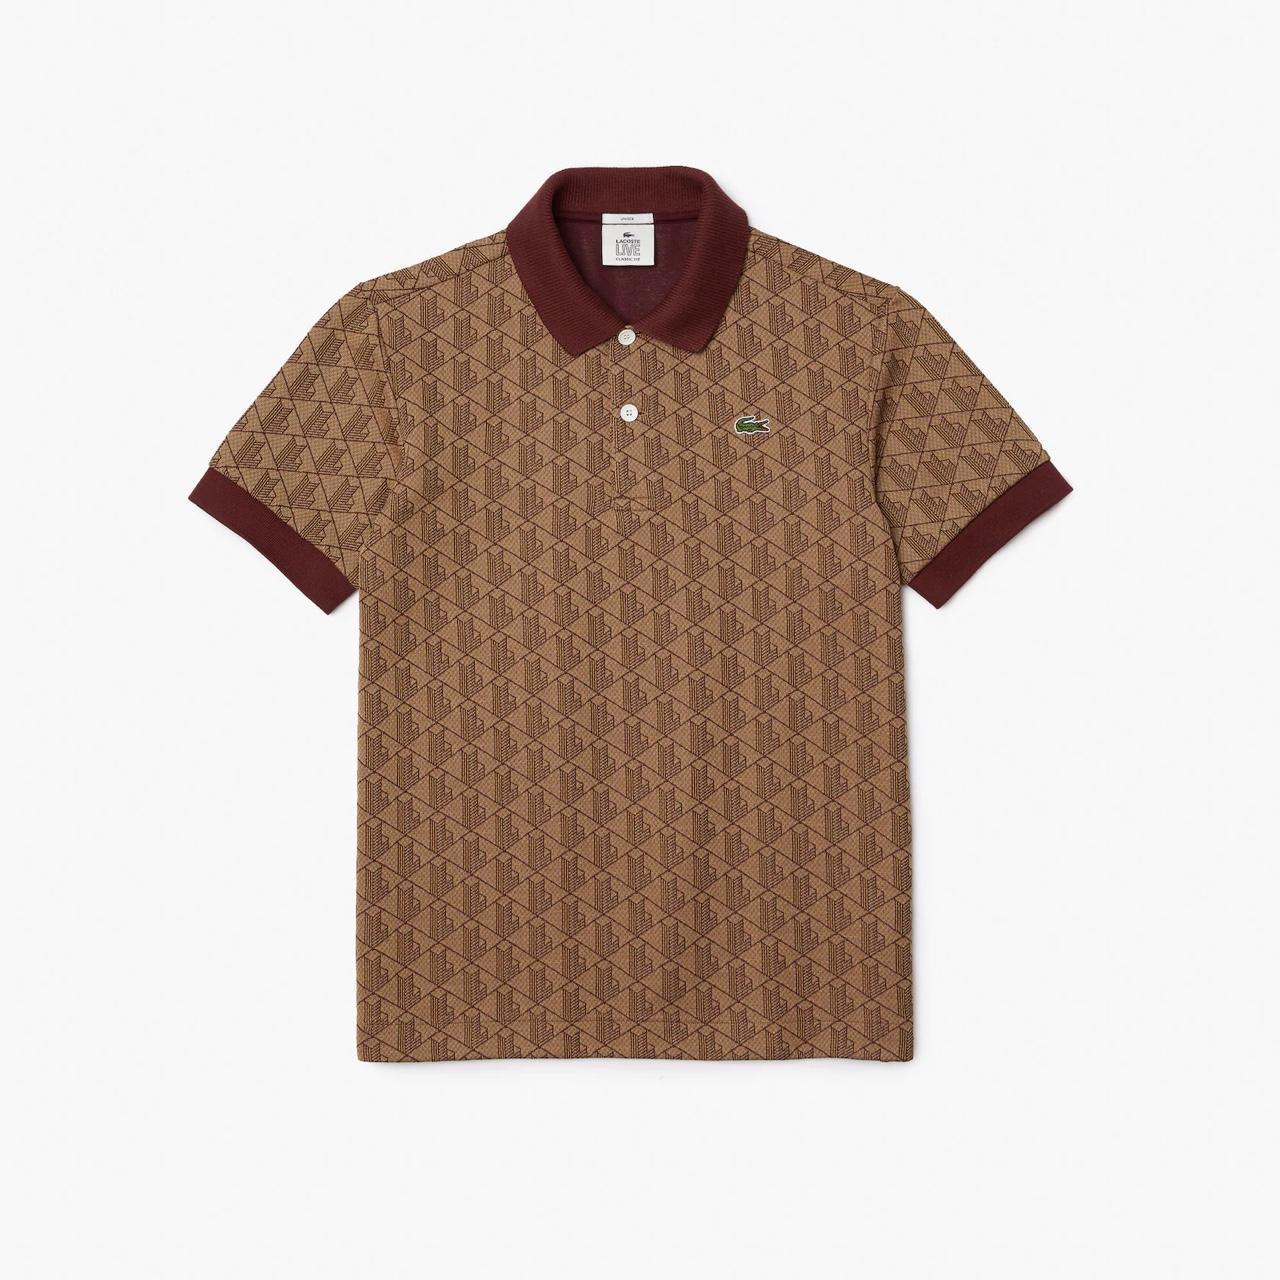 Lacoste Live Men's Tan and Burgundy Polo-shirts (2)